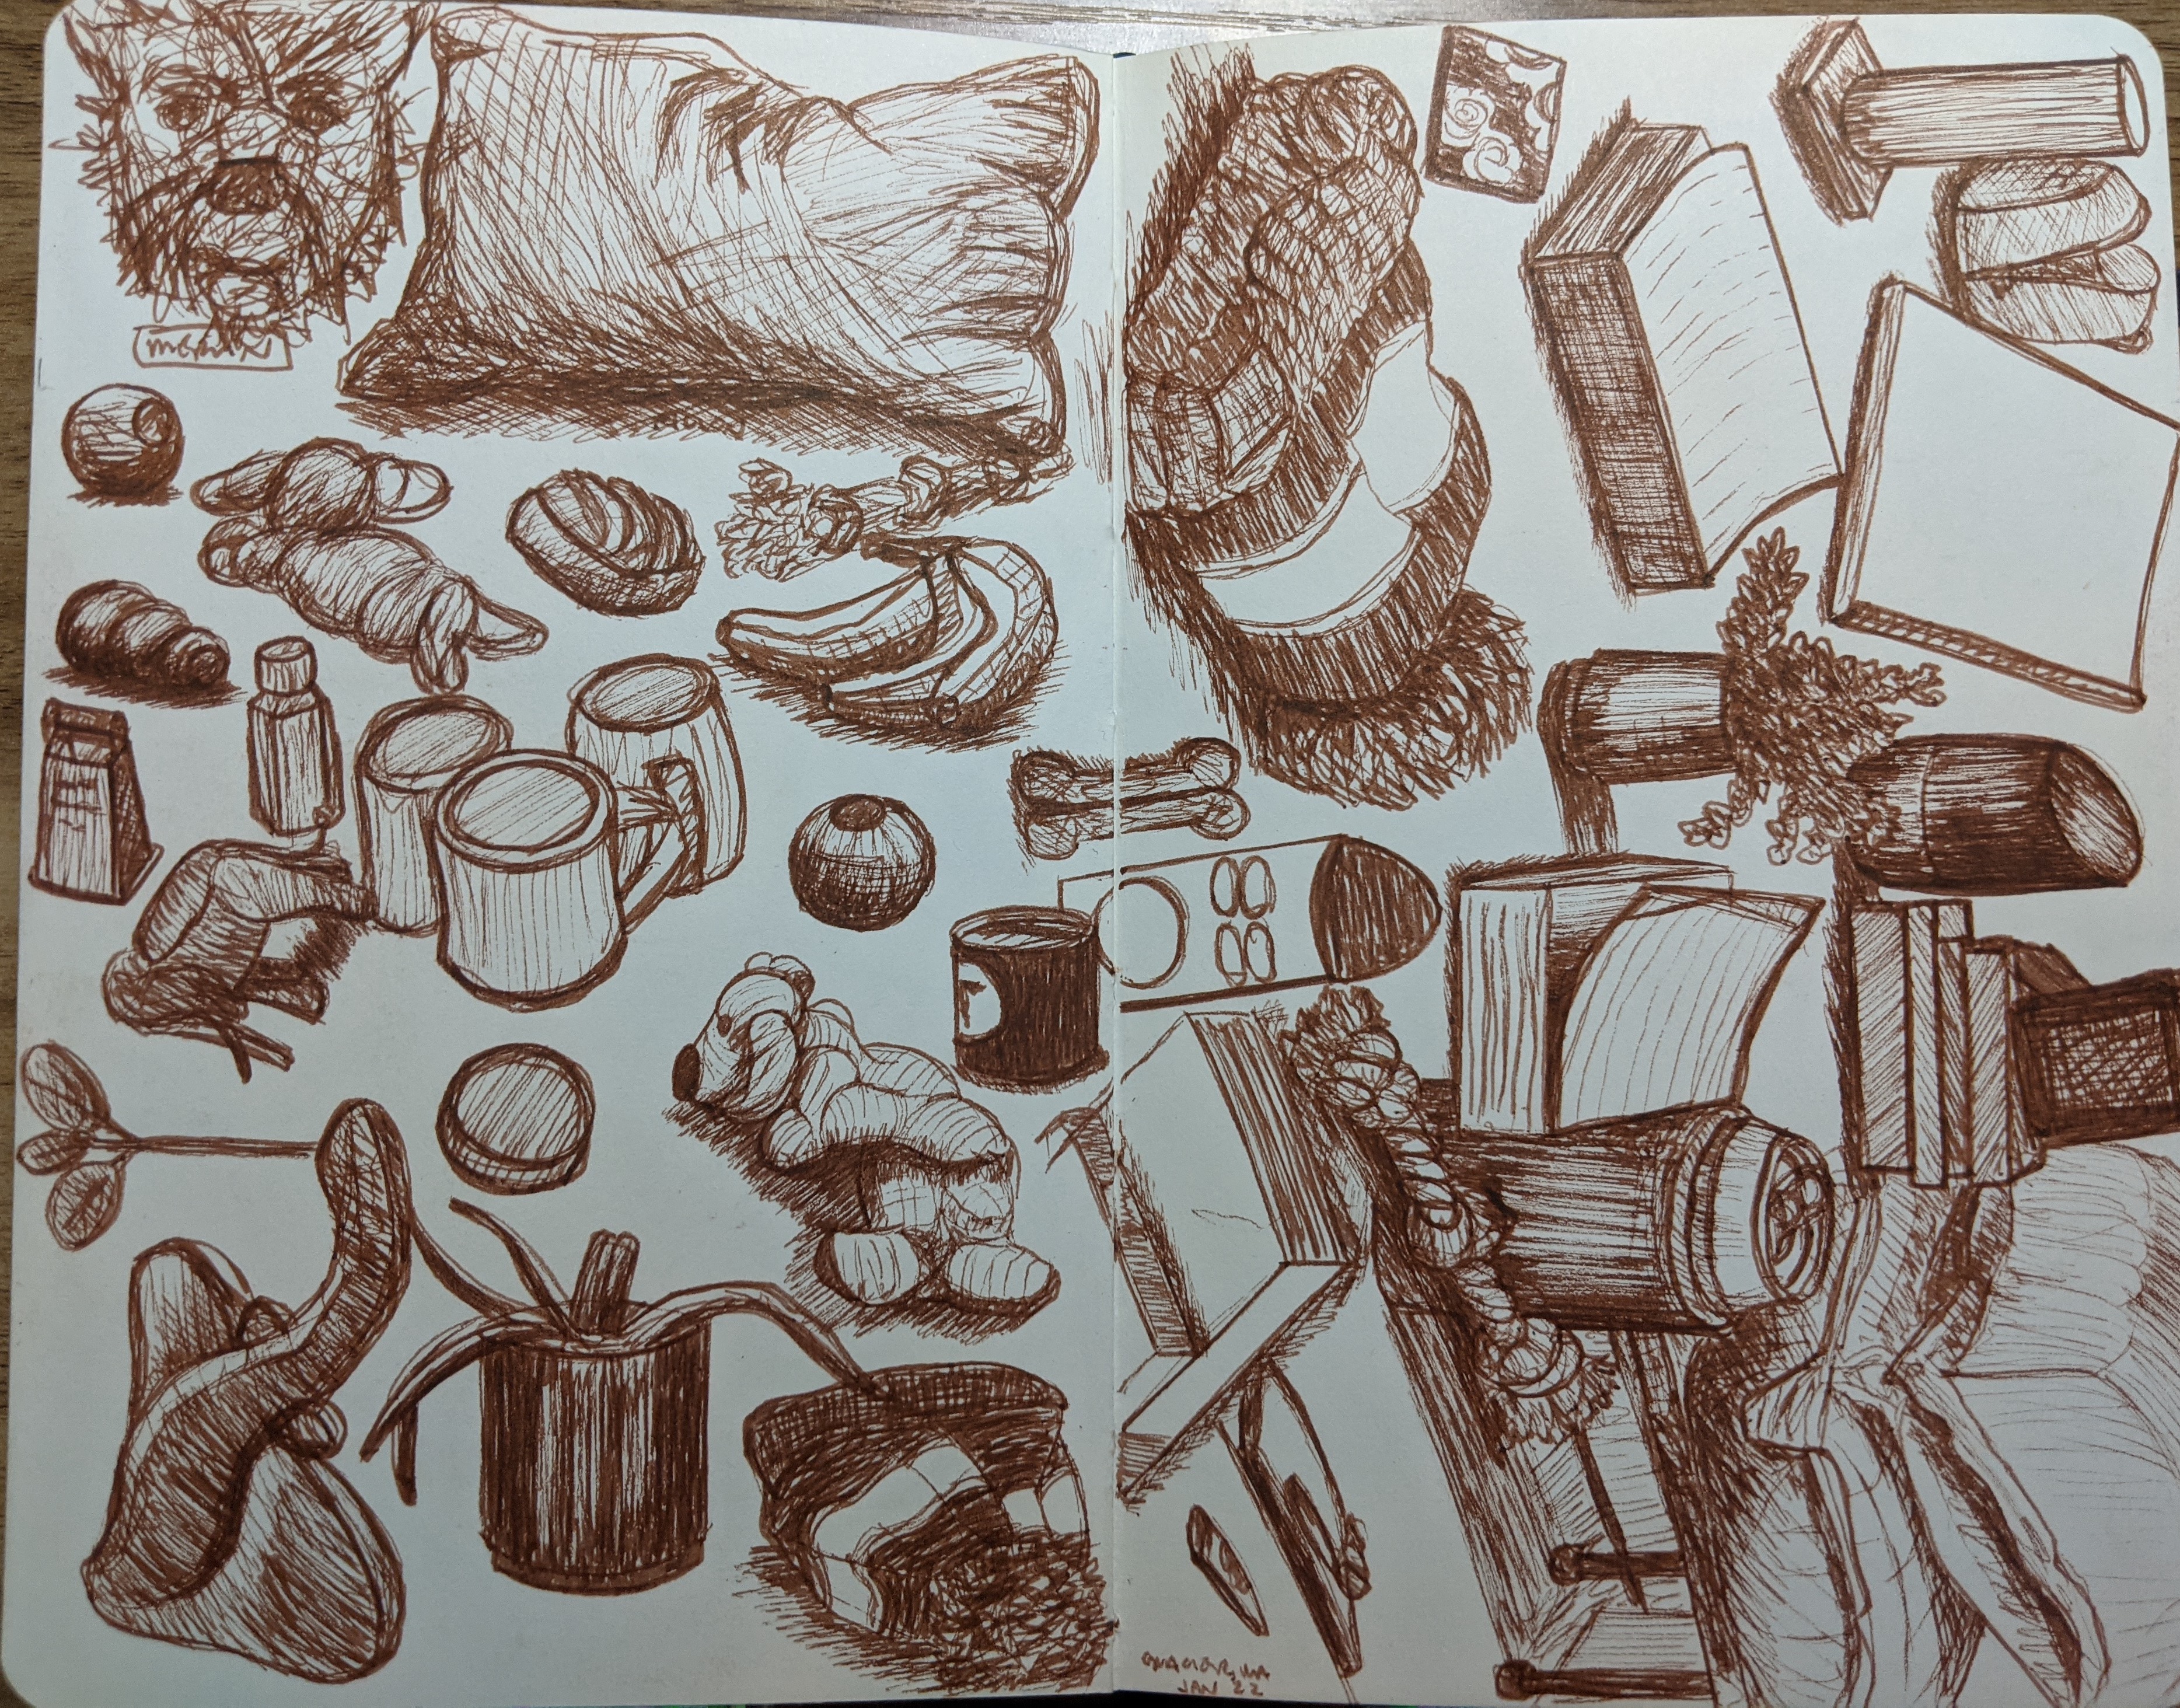 sepia toned sketches of household objects